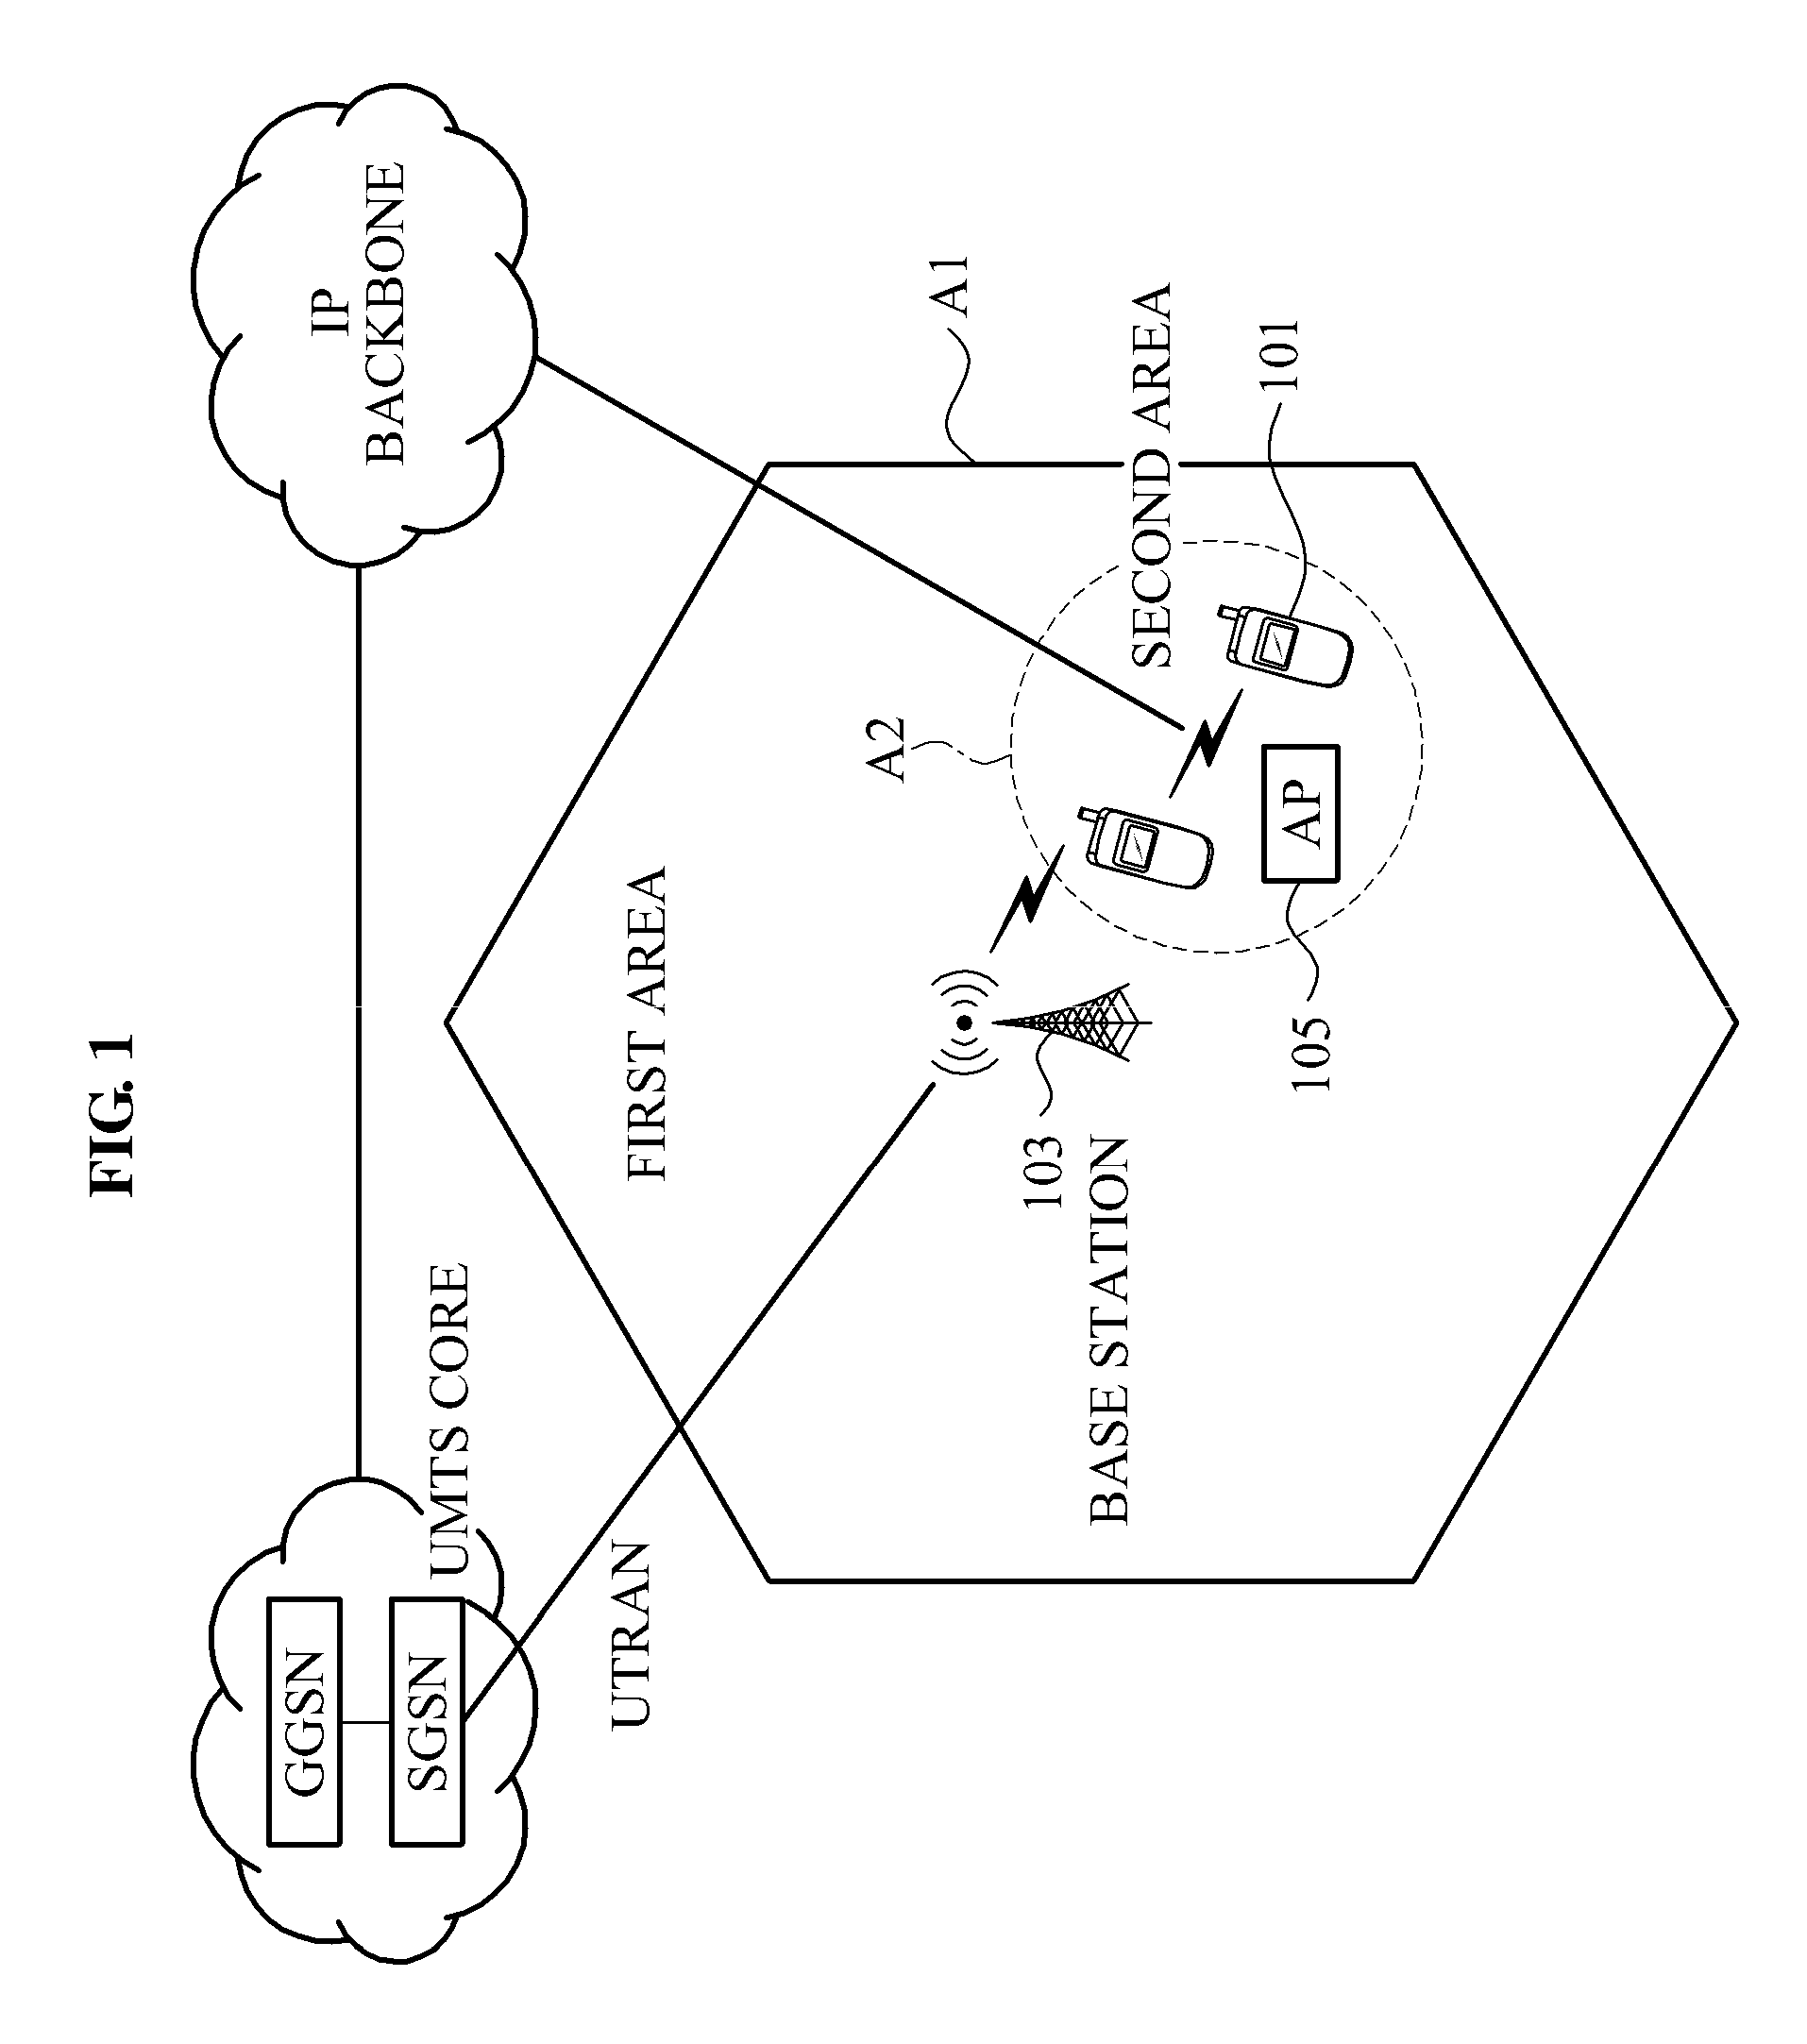 Dual mode terminal for supporting access in different network, network apparatus and operation method thereof